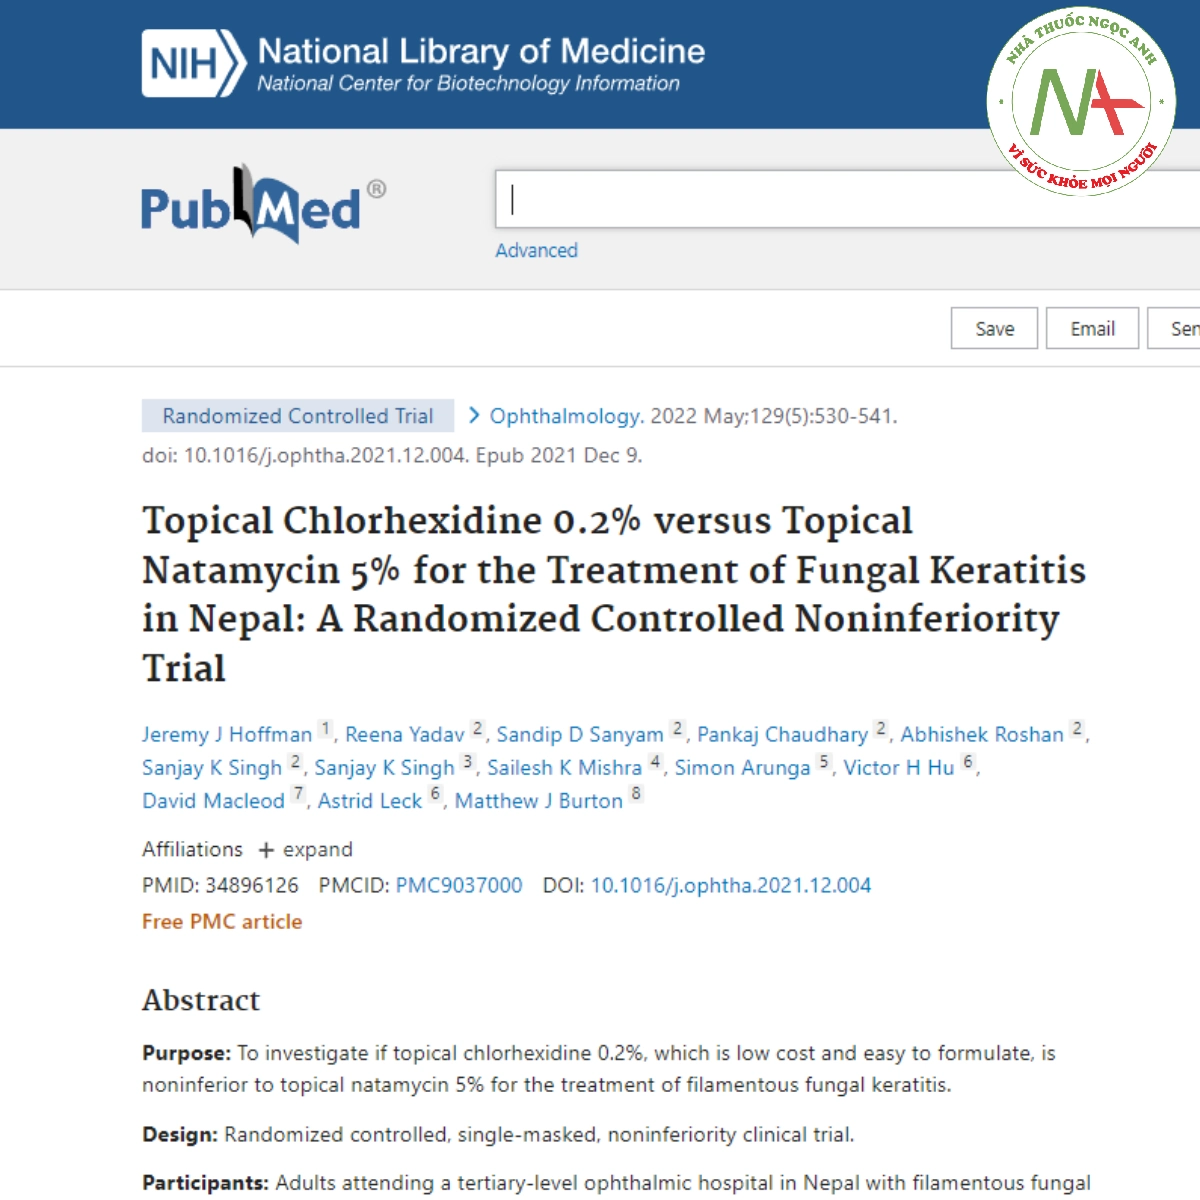 Topical Chlorhexidine 0.2% versus Topical Natamycin 5% for the Treatment of Fungal Keratitis in Nepal_ A Randomized Controlled Noninferiority Trial 